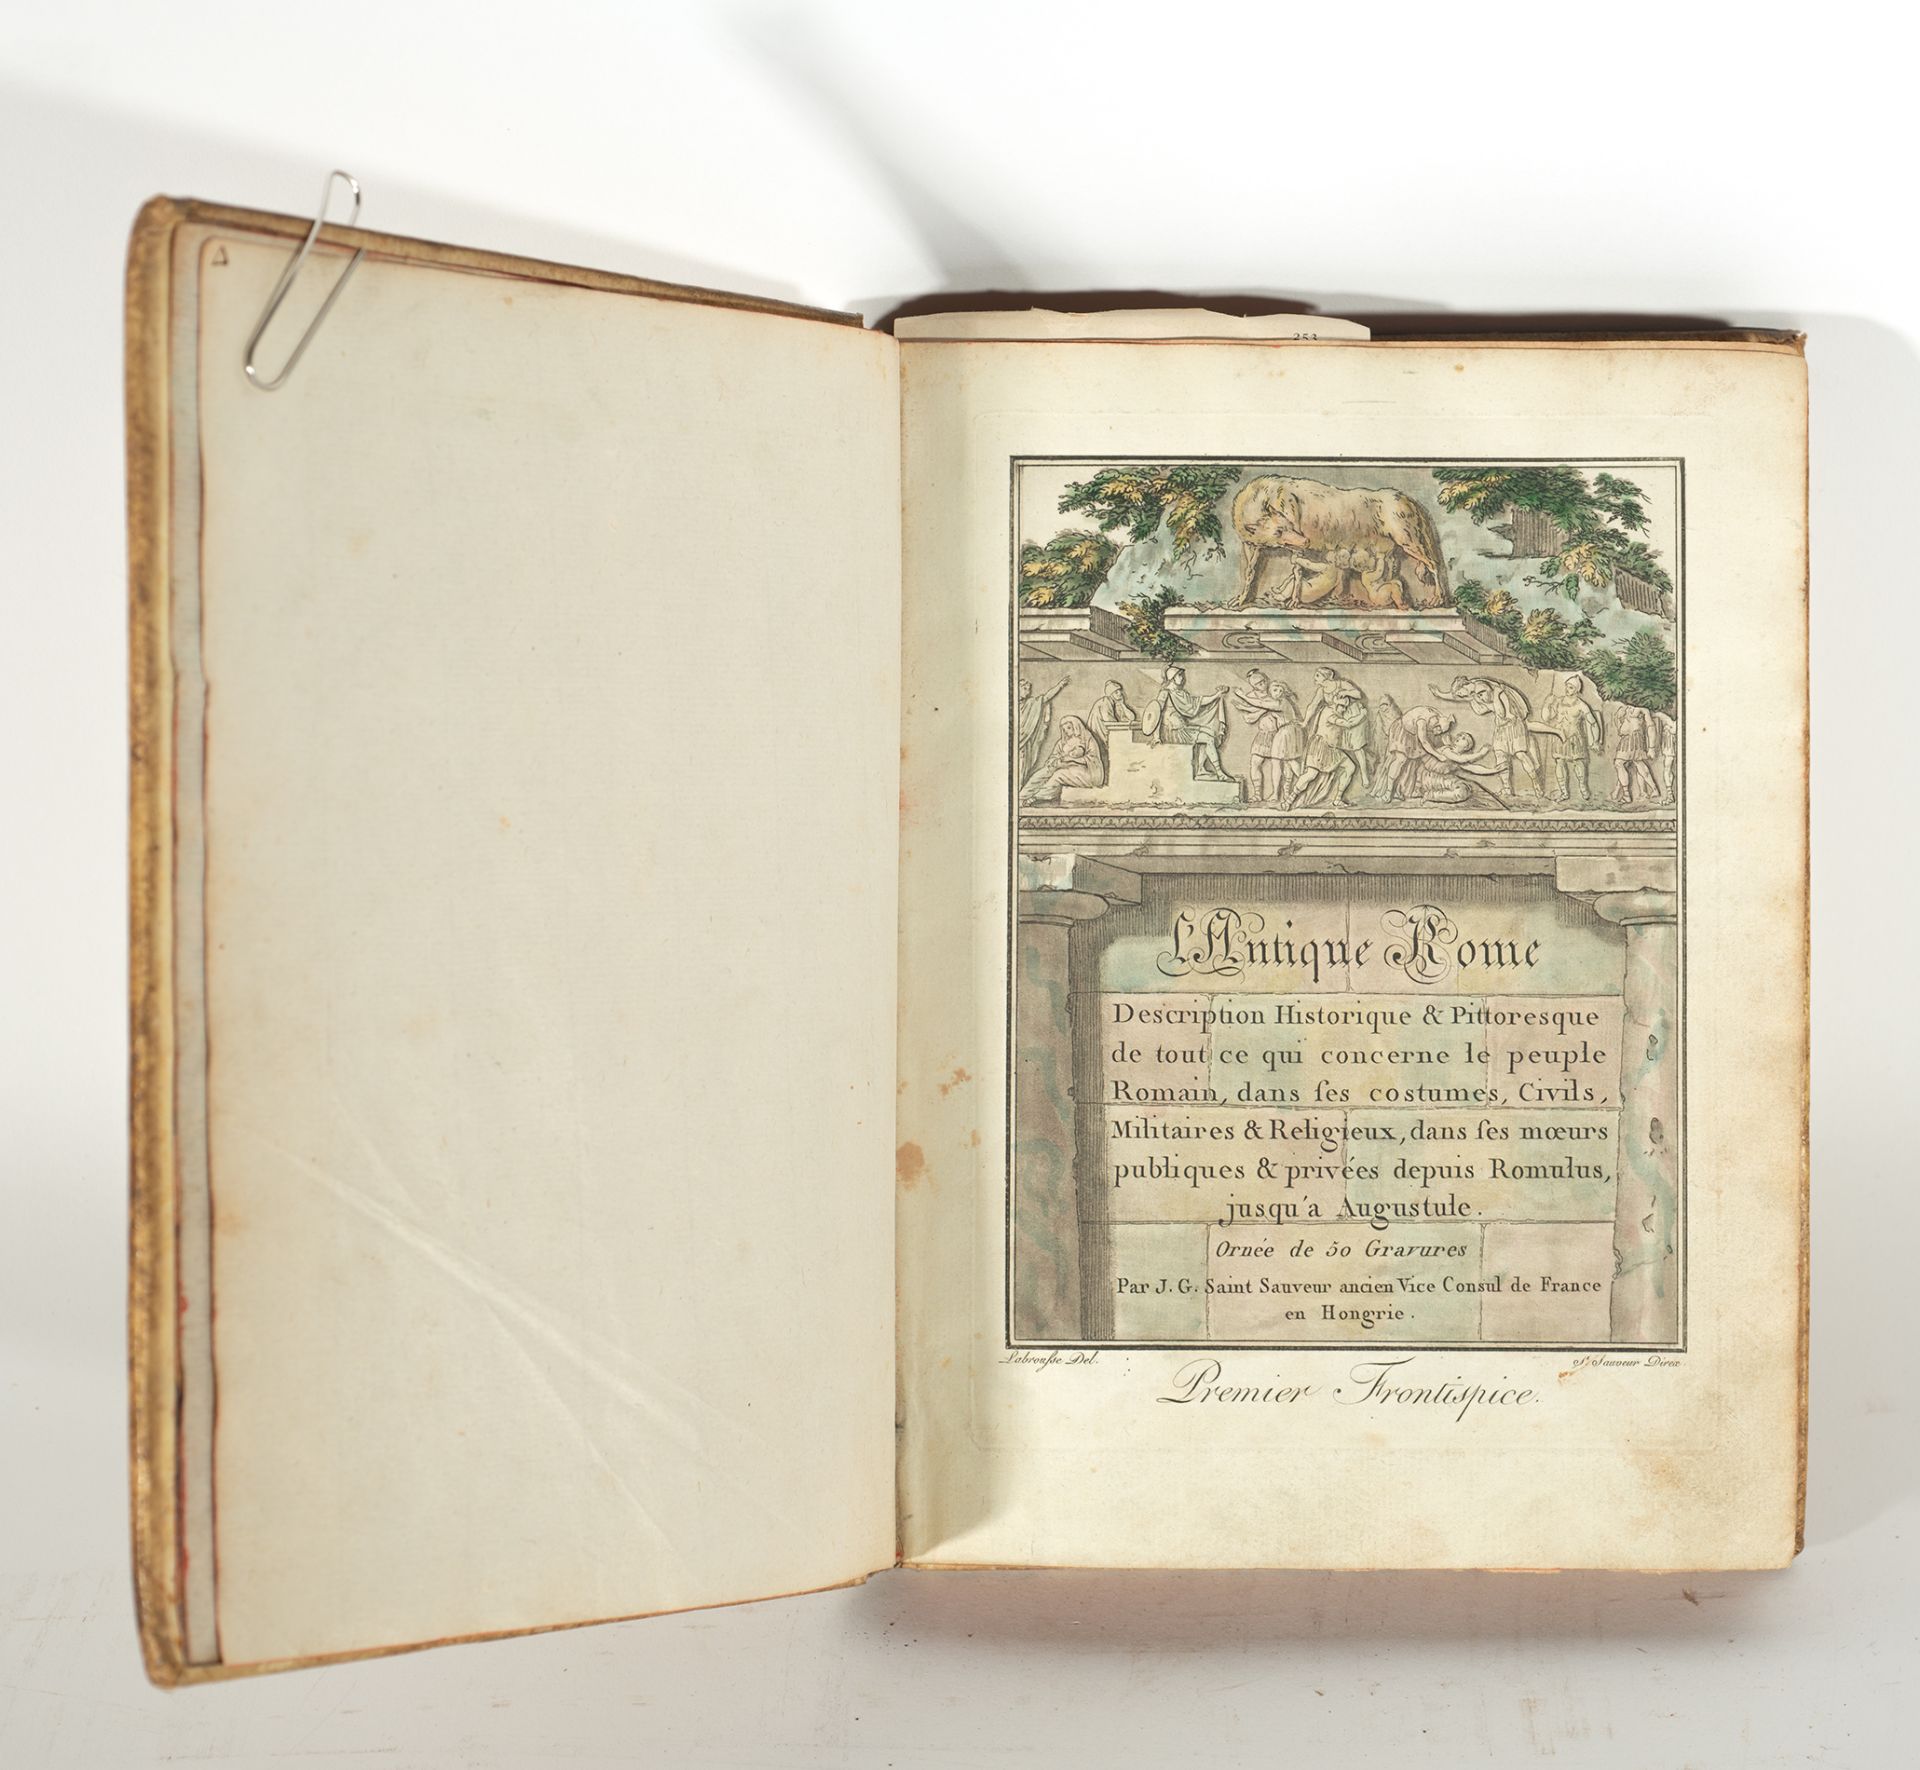 Compendium book on architecture and sculpture in Ancient Rome, 18th century, dated 1796, fourth year - Image 2 of 7